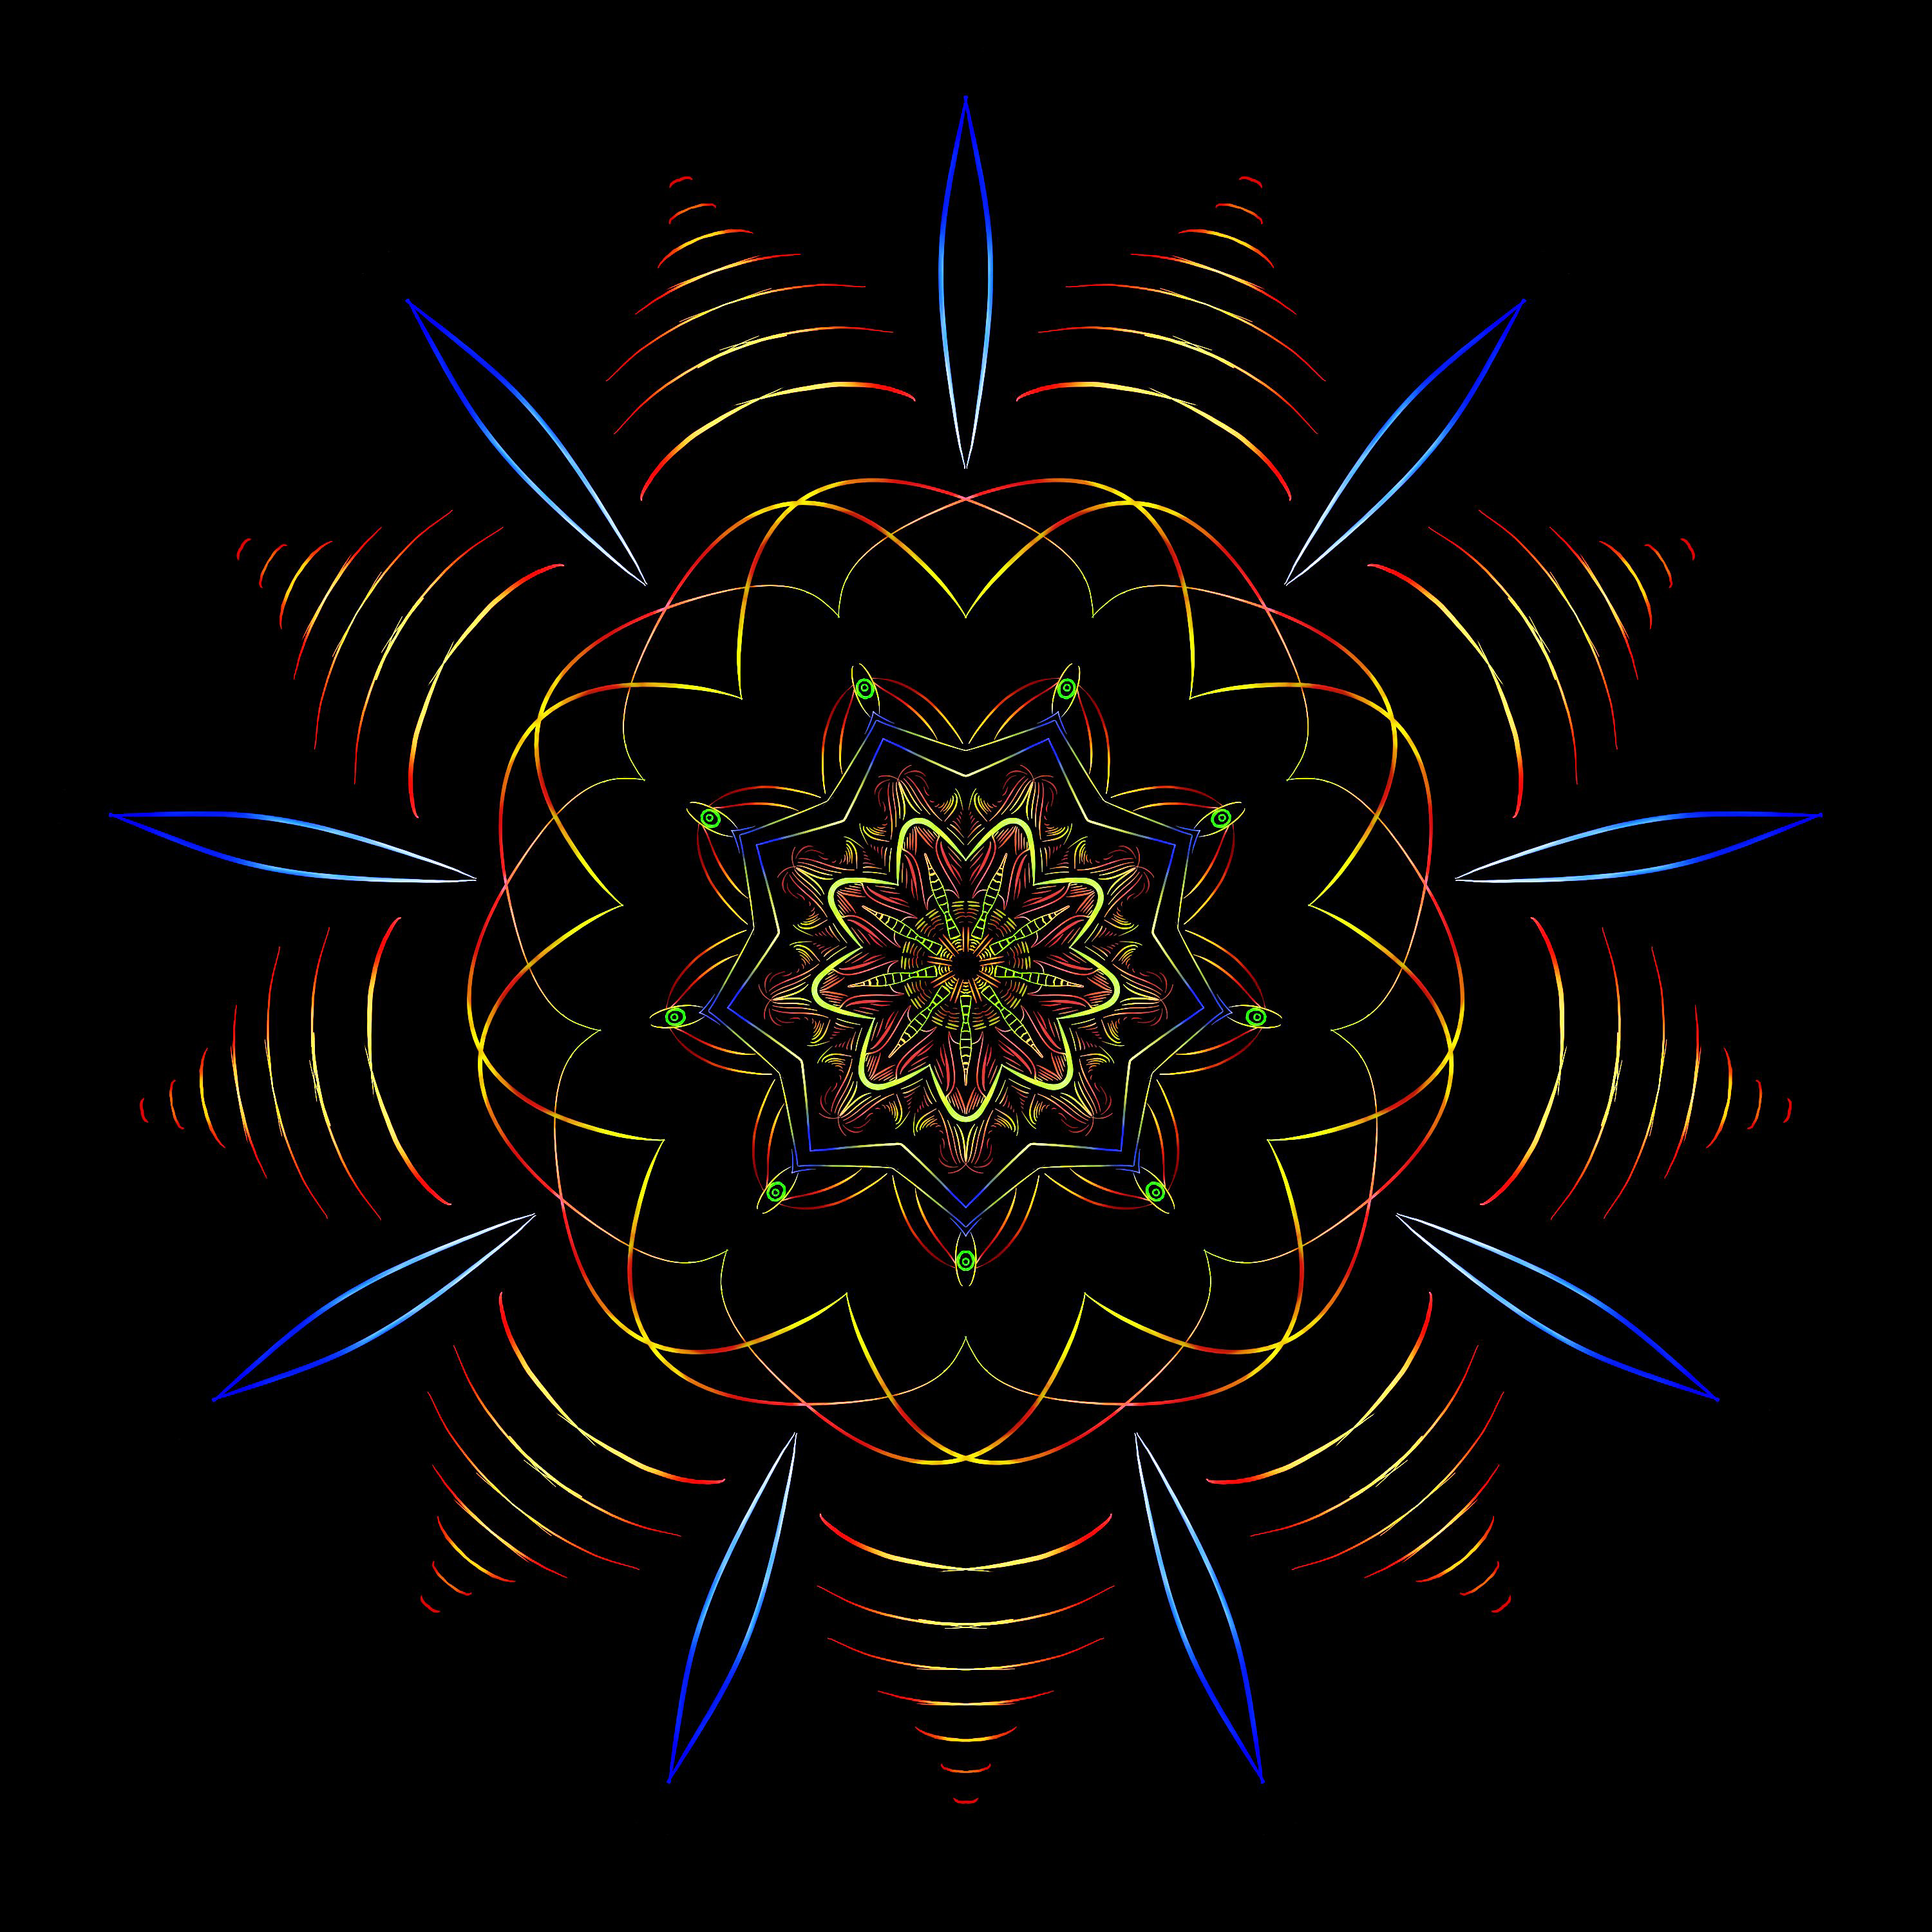 114576 Screensavers and Wallpapers Mandala for phone. Download abstract, dark, pattern, mandala pictures for free